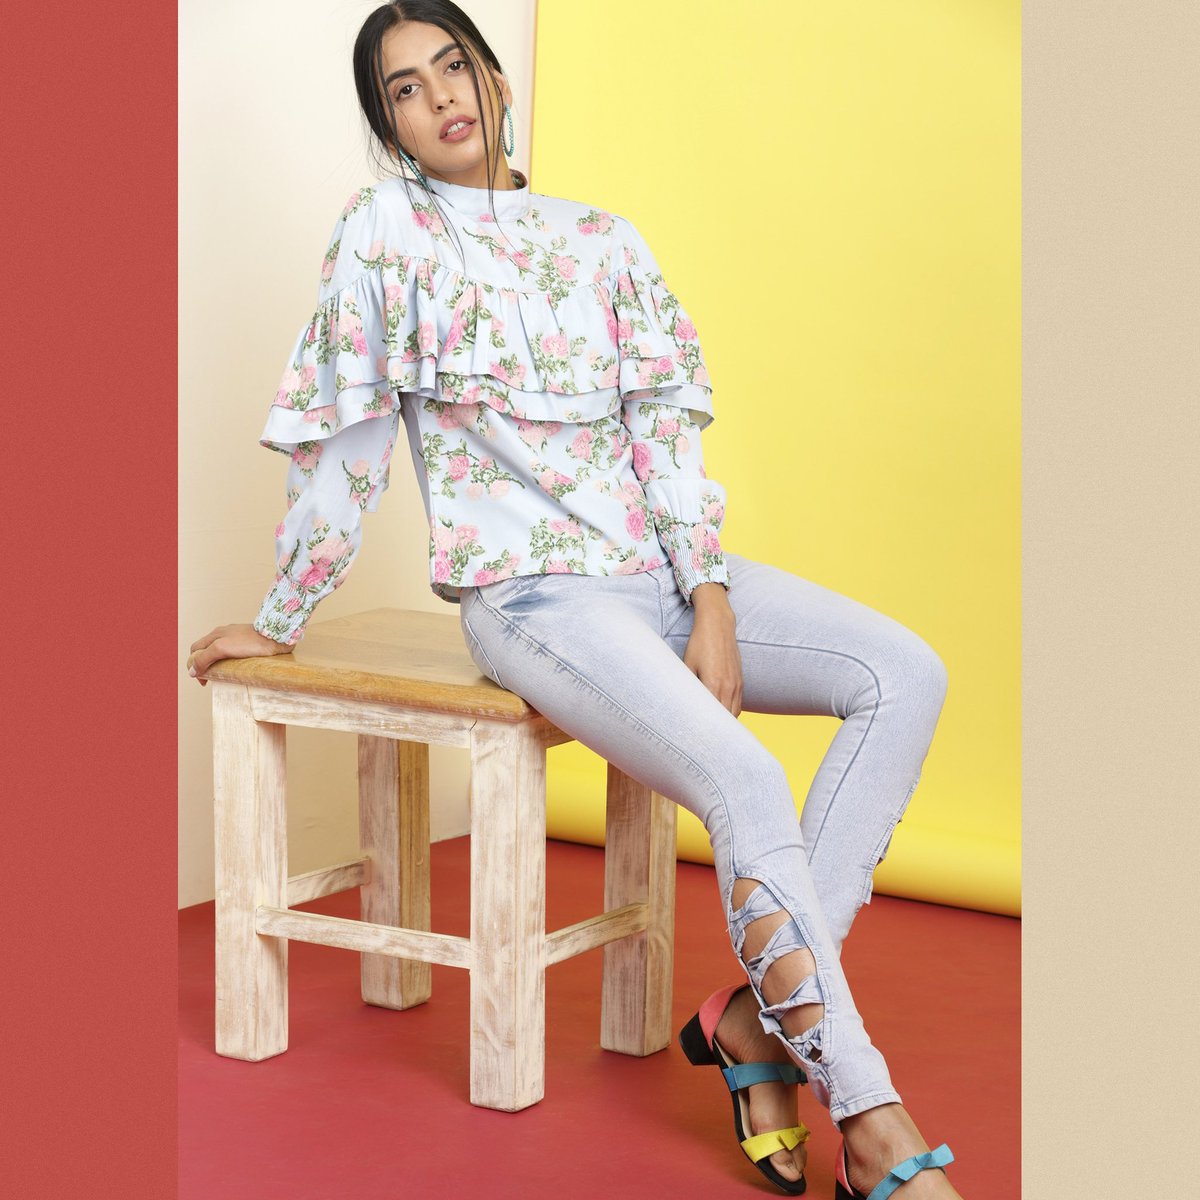 A new world of fashion. The new look of today. Buy now>>bit.ly/2AS8HV0
#tops #tunics #denim #womendenim #denimlook #casual #thecasualook #womensfashion #womenswear #fashion #style #comfort #ifawoman #ifalook #ifazone